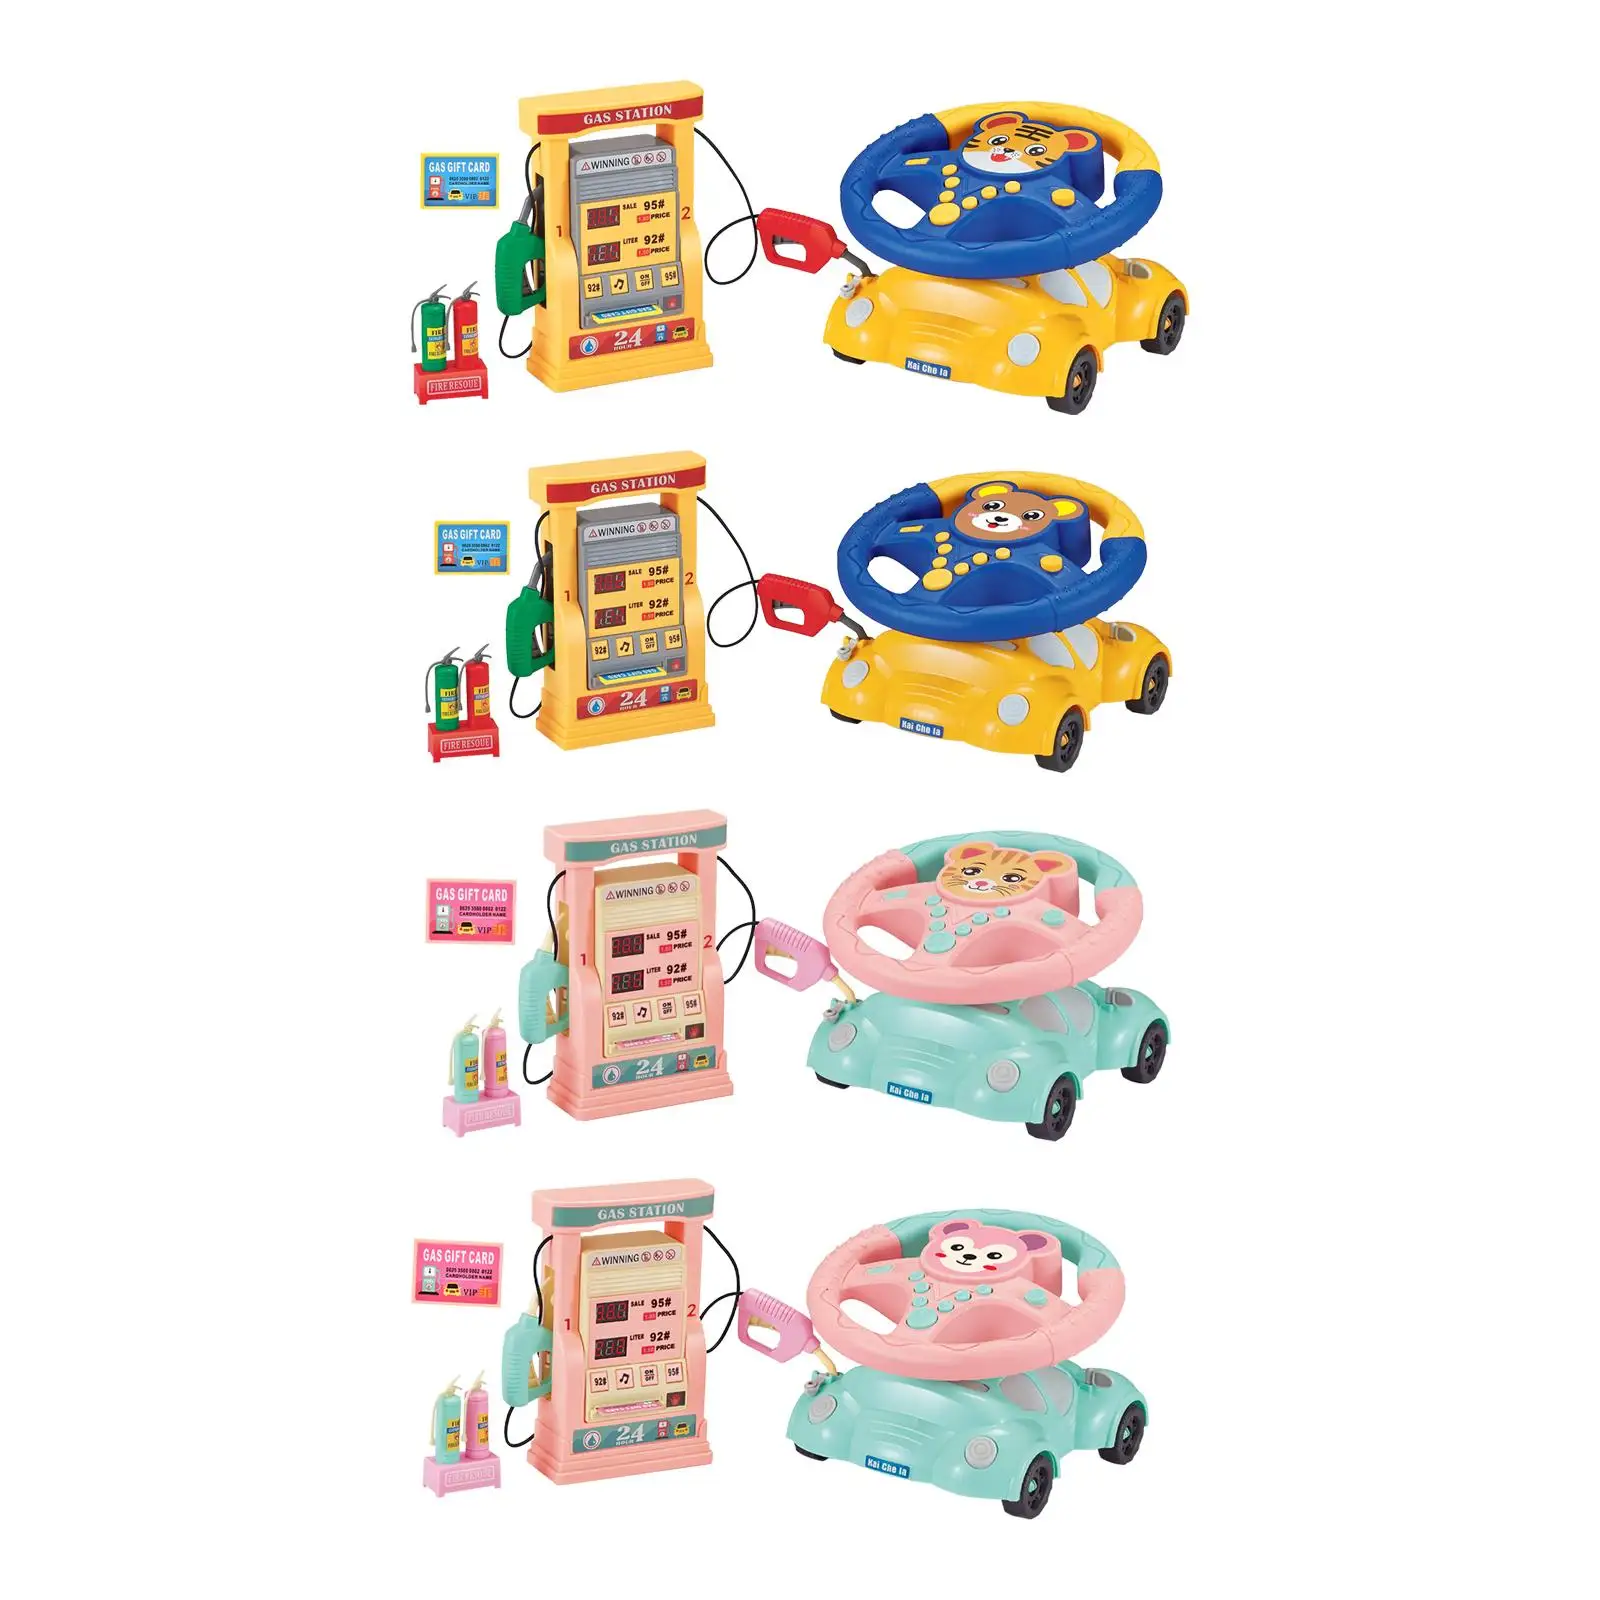 Simulation Gas Station Toy Pretend Play Hand Eye Coordination Steering Wheel Toy for Creative Gifts